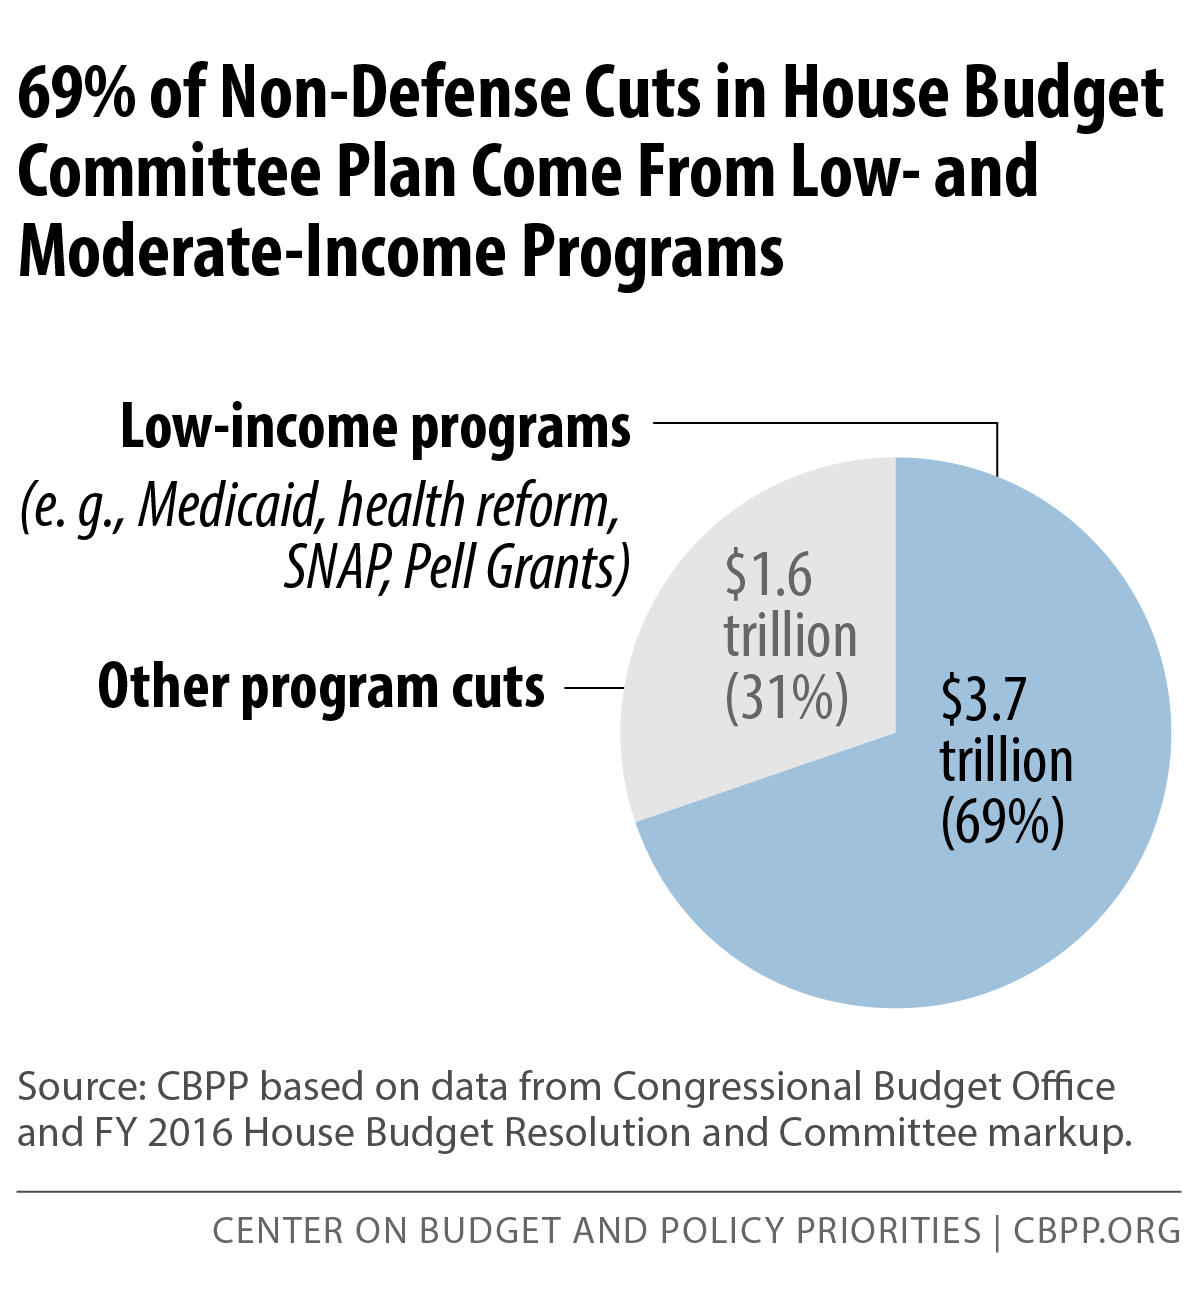 69% of Non-Defense Cuts in House Budget Committee Plan Come from Low- and Moderate-Income Programs